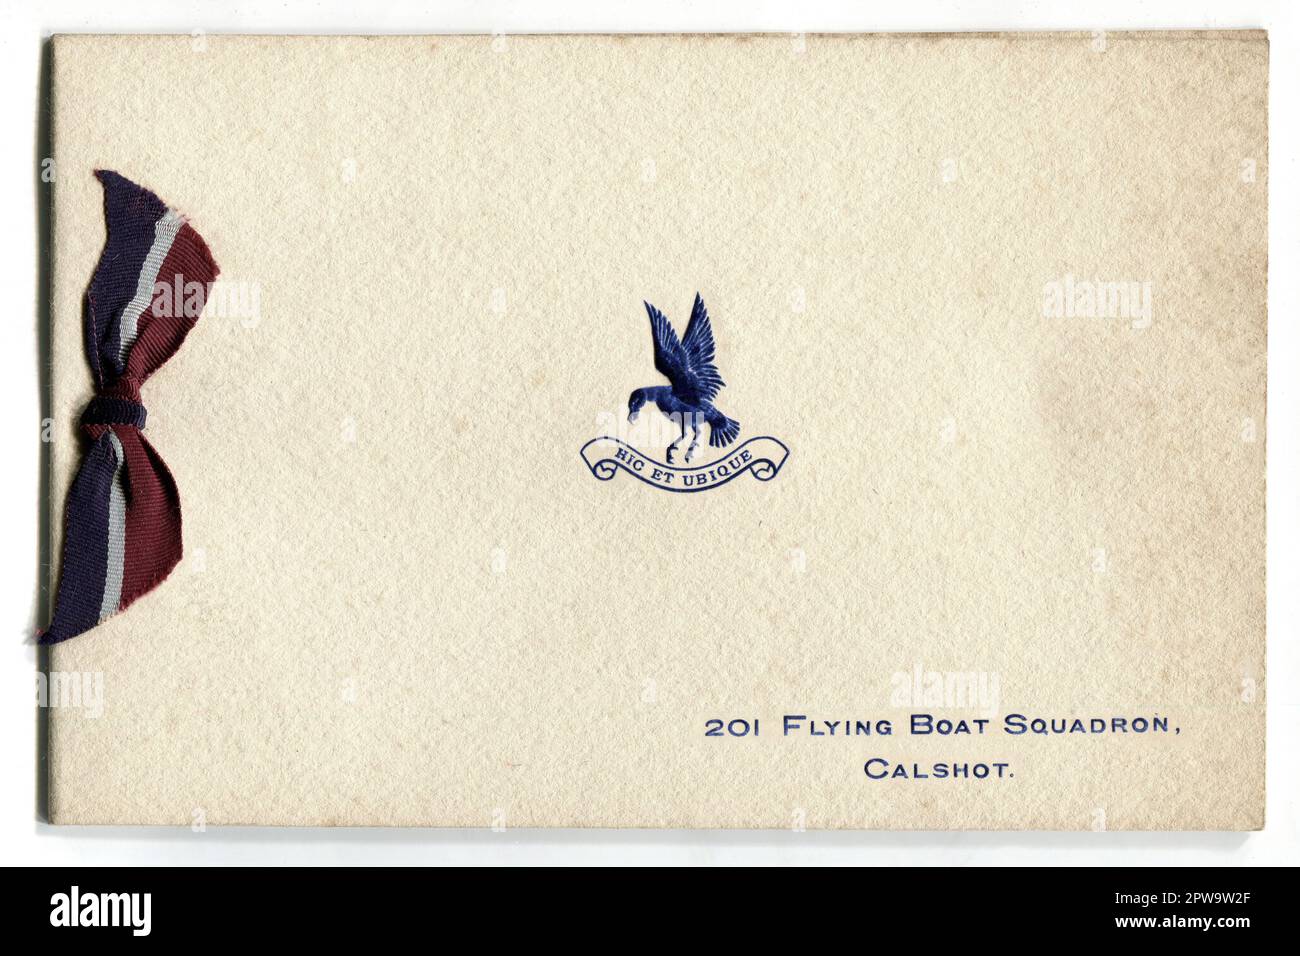 A 1930s greetings card produced for members of 201 Flying Boat Squadron, Royal Air Force. The card is decorated with the squadron’s badge which consists of a seagull with the Latin motto, “Hic et Ubique” (Here and Everywhere). The card is bound with a ribbon in the colours of the RAF’s necktie.  The squadron was originally formed in October 1914 as No.1 Squadron of the Royal Naval Air Service. It was renumbered as 201 on the formation of the RAF on 1 April 1918 and disbanded in December 1919. It was reformed at RAF Calshot, Hampshire on 1 January 1929 as a flying boat unit. Stock Photo